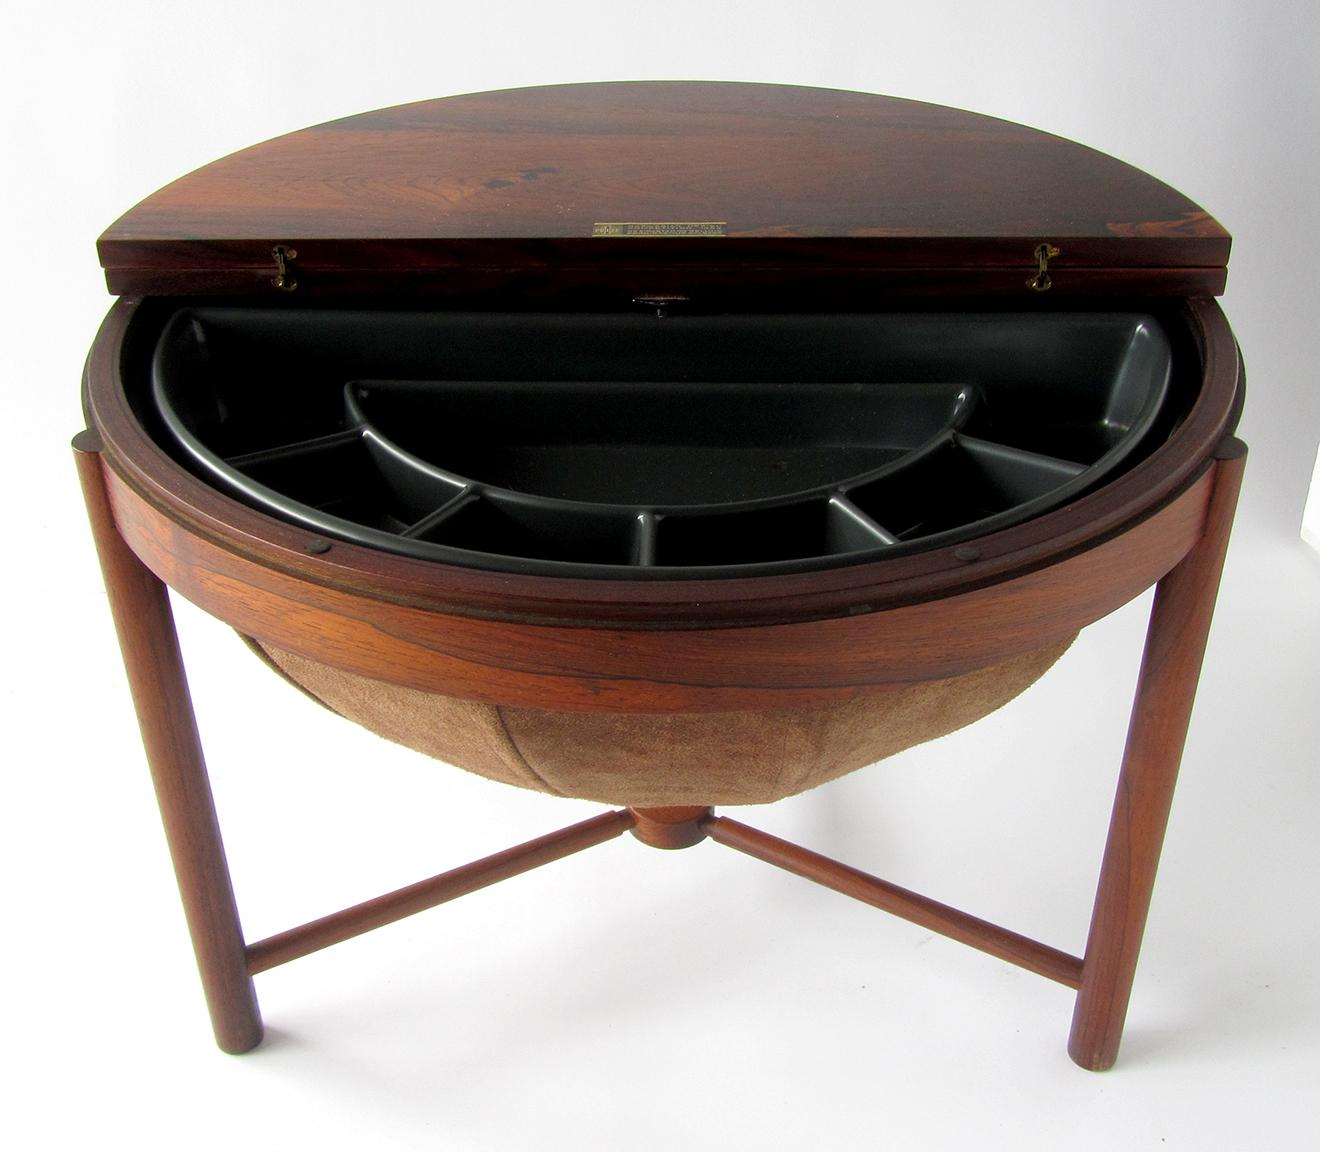 A handsome side table by Rastad & Relling for Rasmus Solberg. The Hinged top opens to reveal storage and a rotating 1/2 tray with partitioned sections. The exotic cocobolo wood is in incredible condition and the basket/storage underneath is